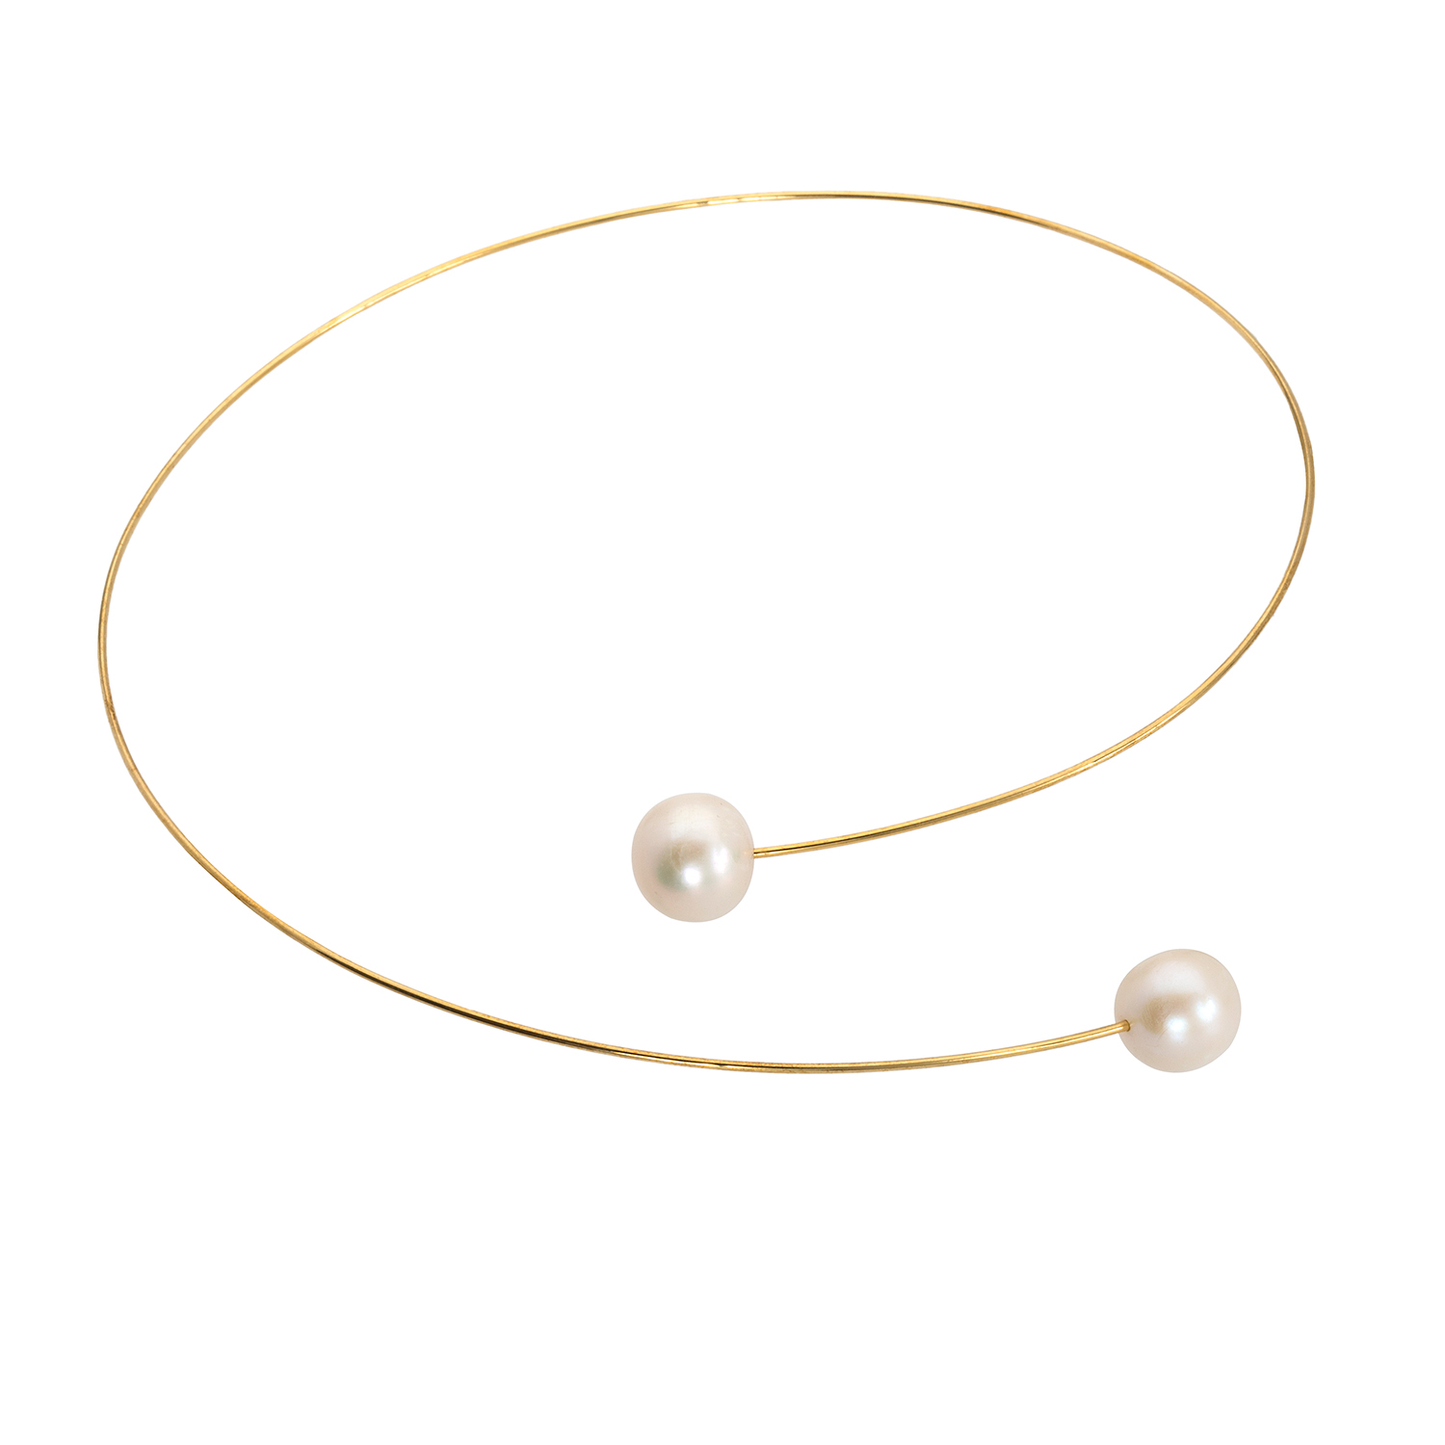 Round Asymmetric Neckwire with Round Freshwater Pearls